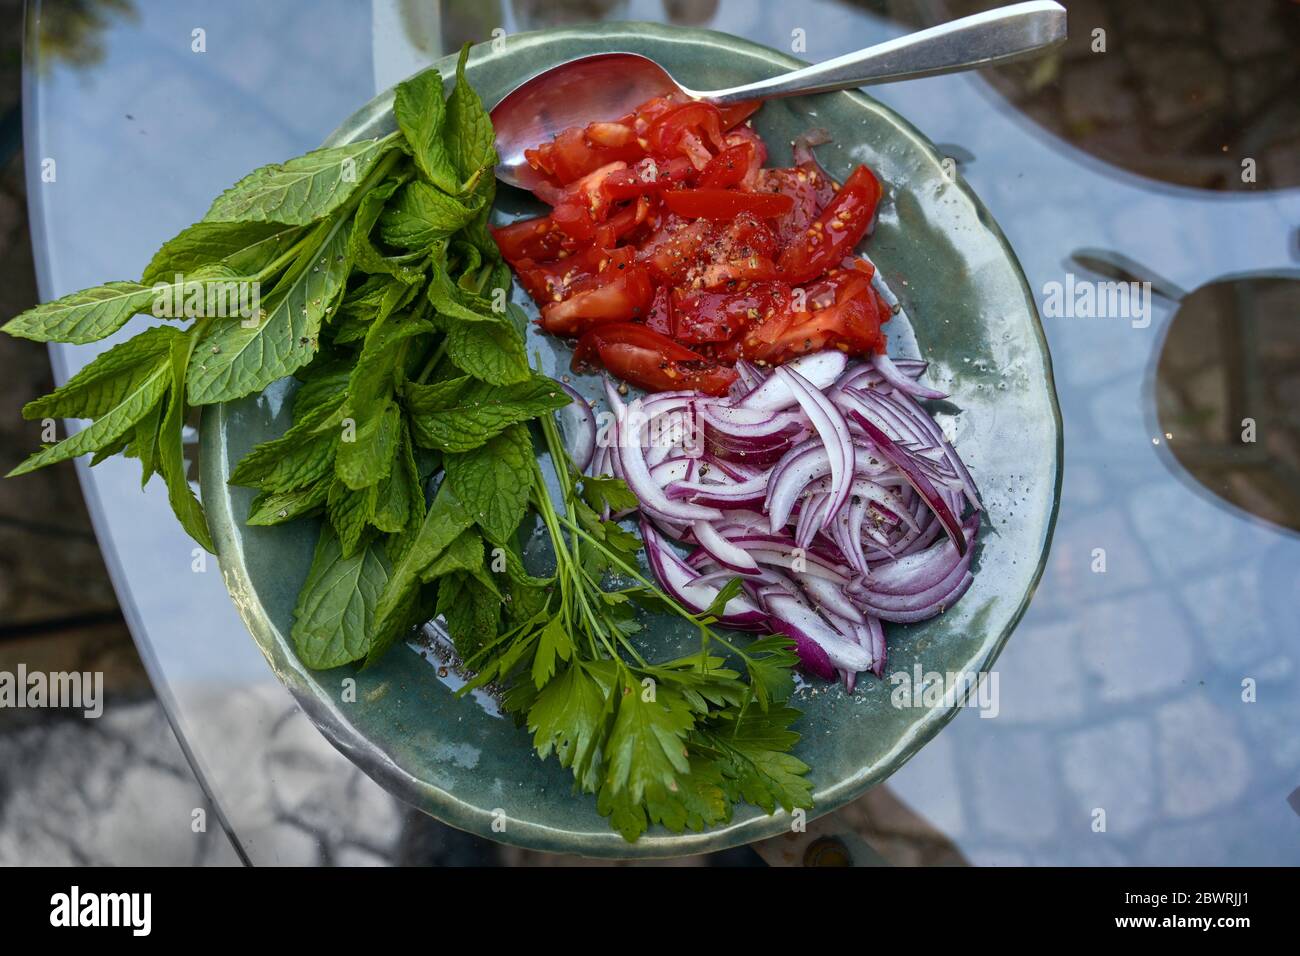 Raw ingredients for a fresh salad or wrap stuffing with red onions, tomatoes and herbs in a rustic bowl on a glass garden table, high angle view from Stock Photo